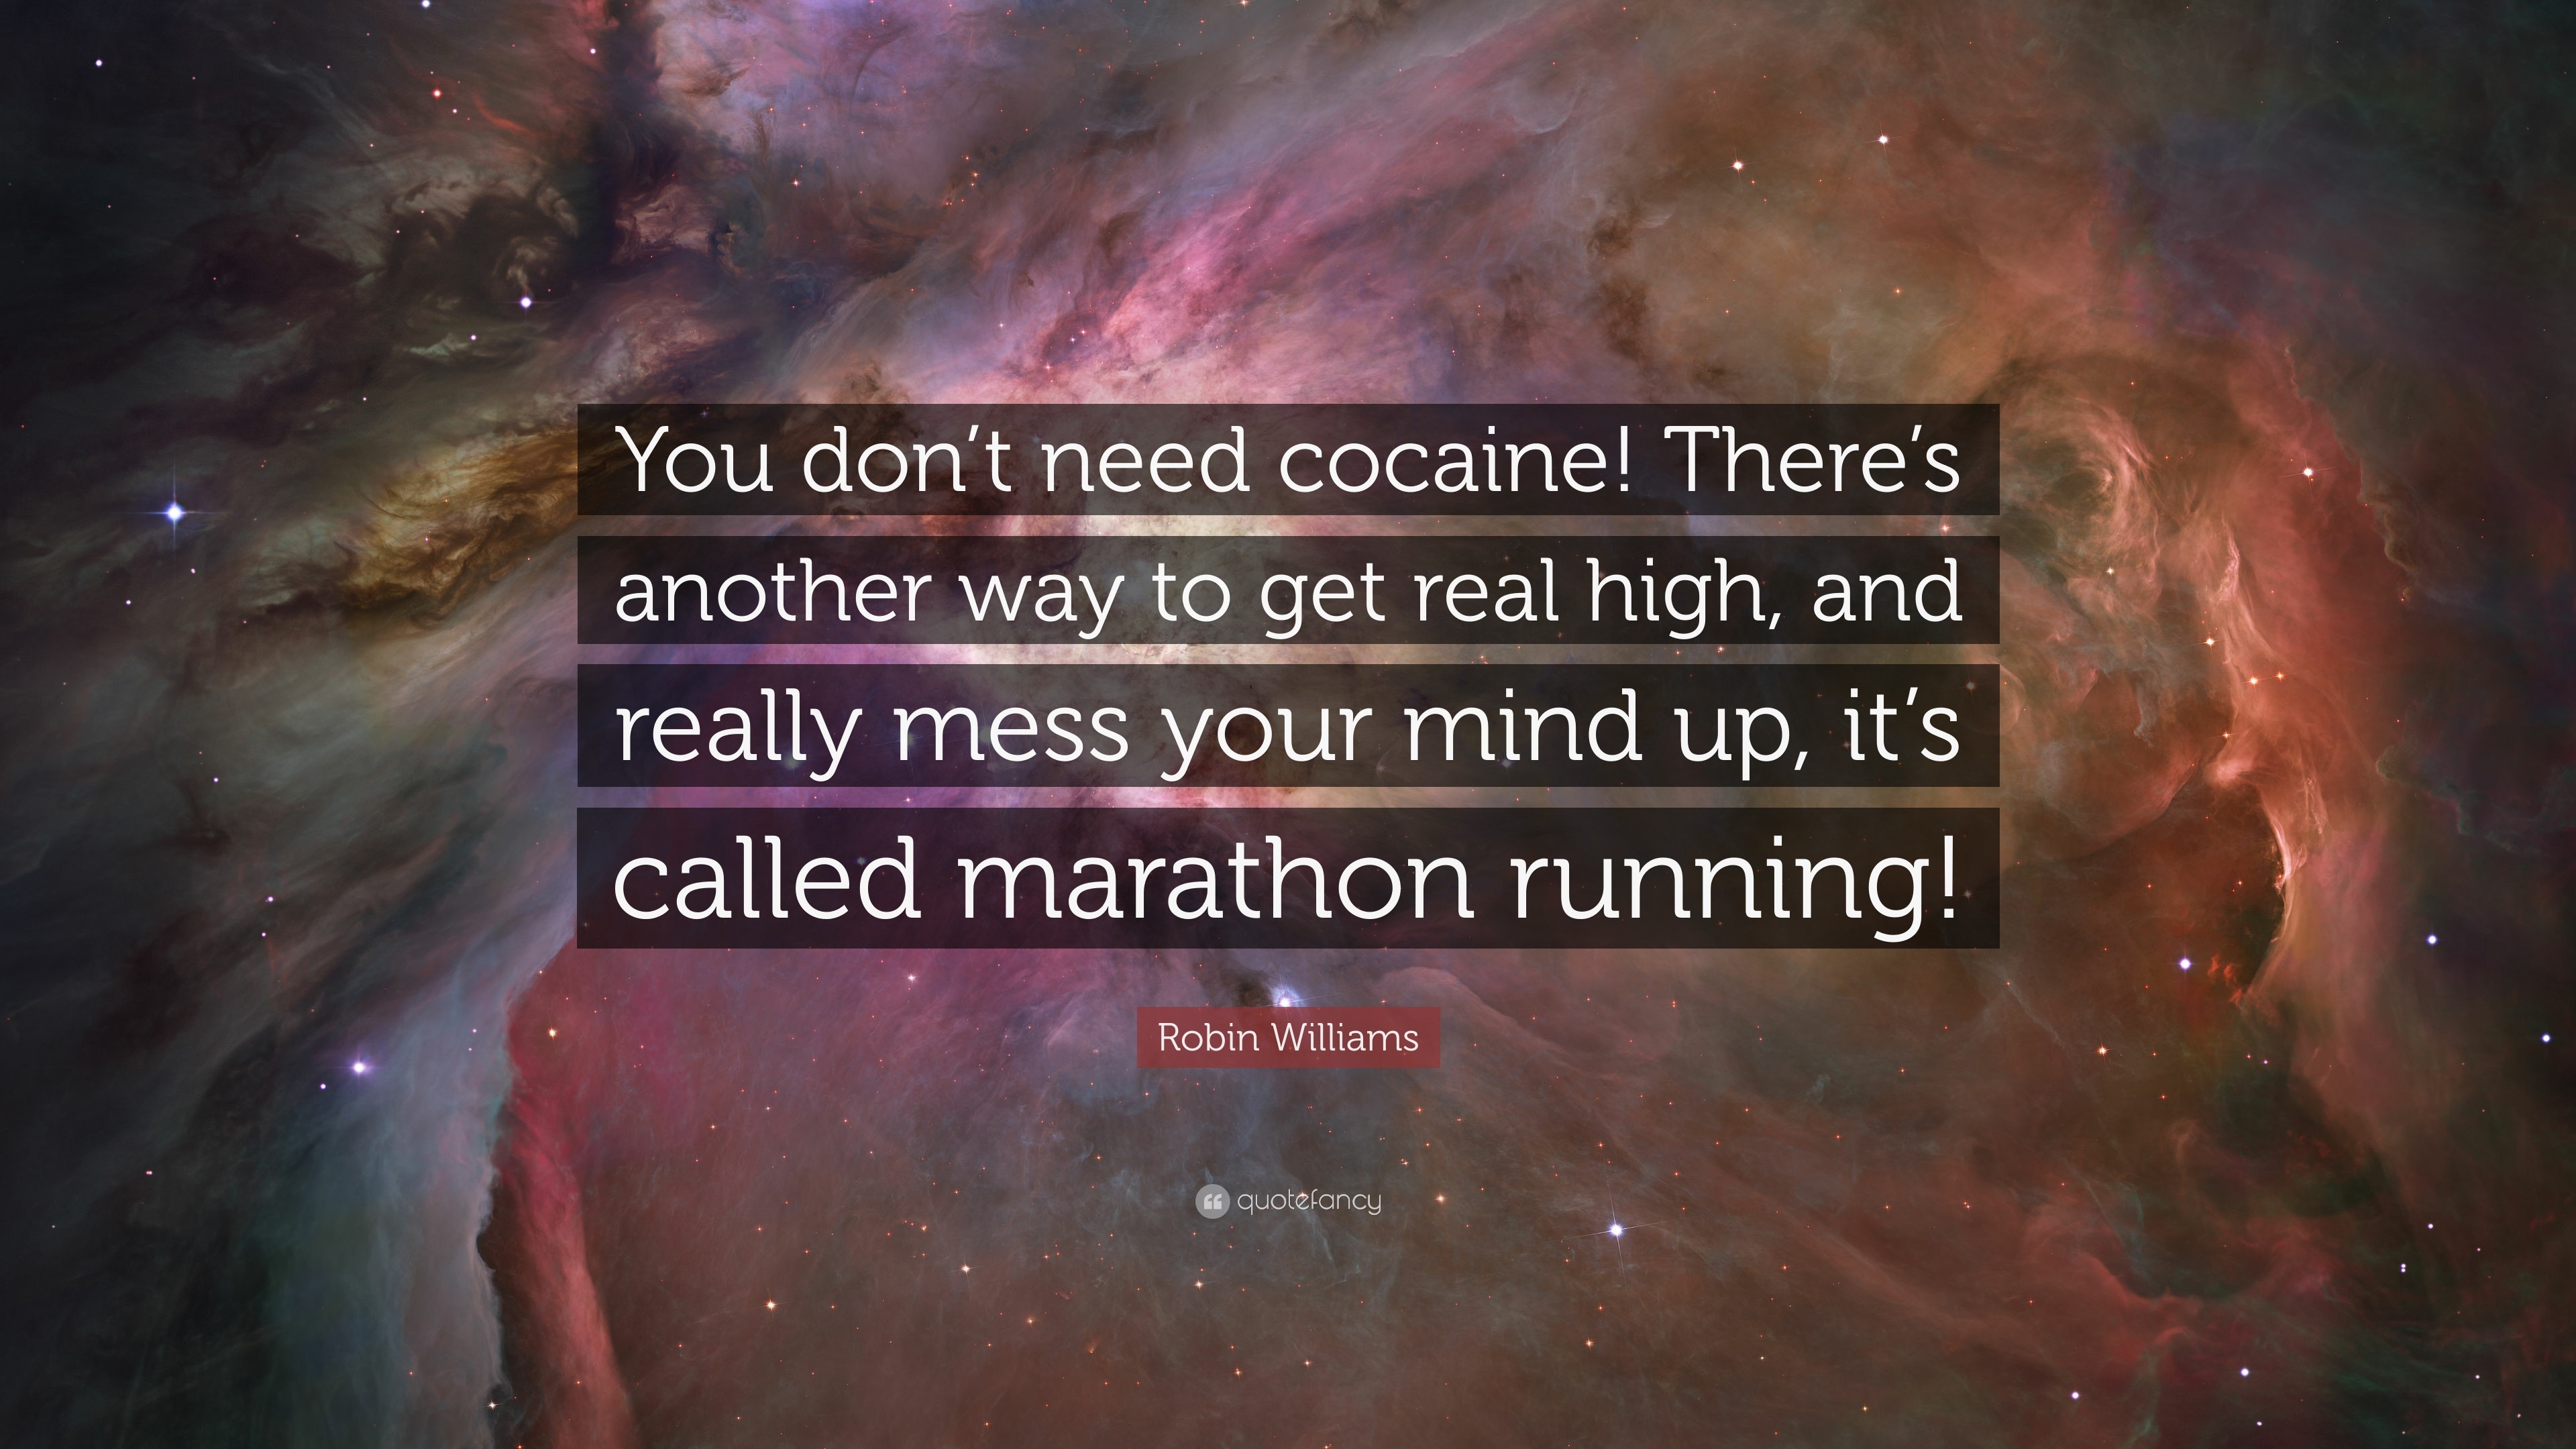 3840x2160 Robin Williams Quote: “You don't need cocaine! There's another way to